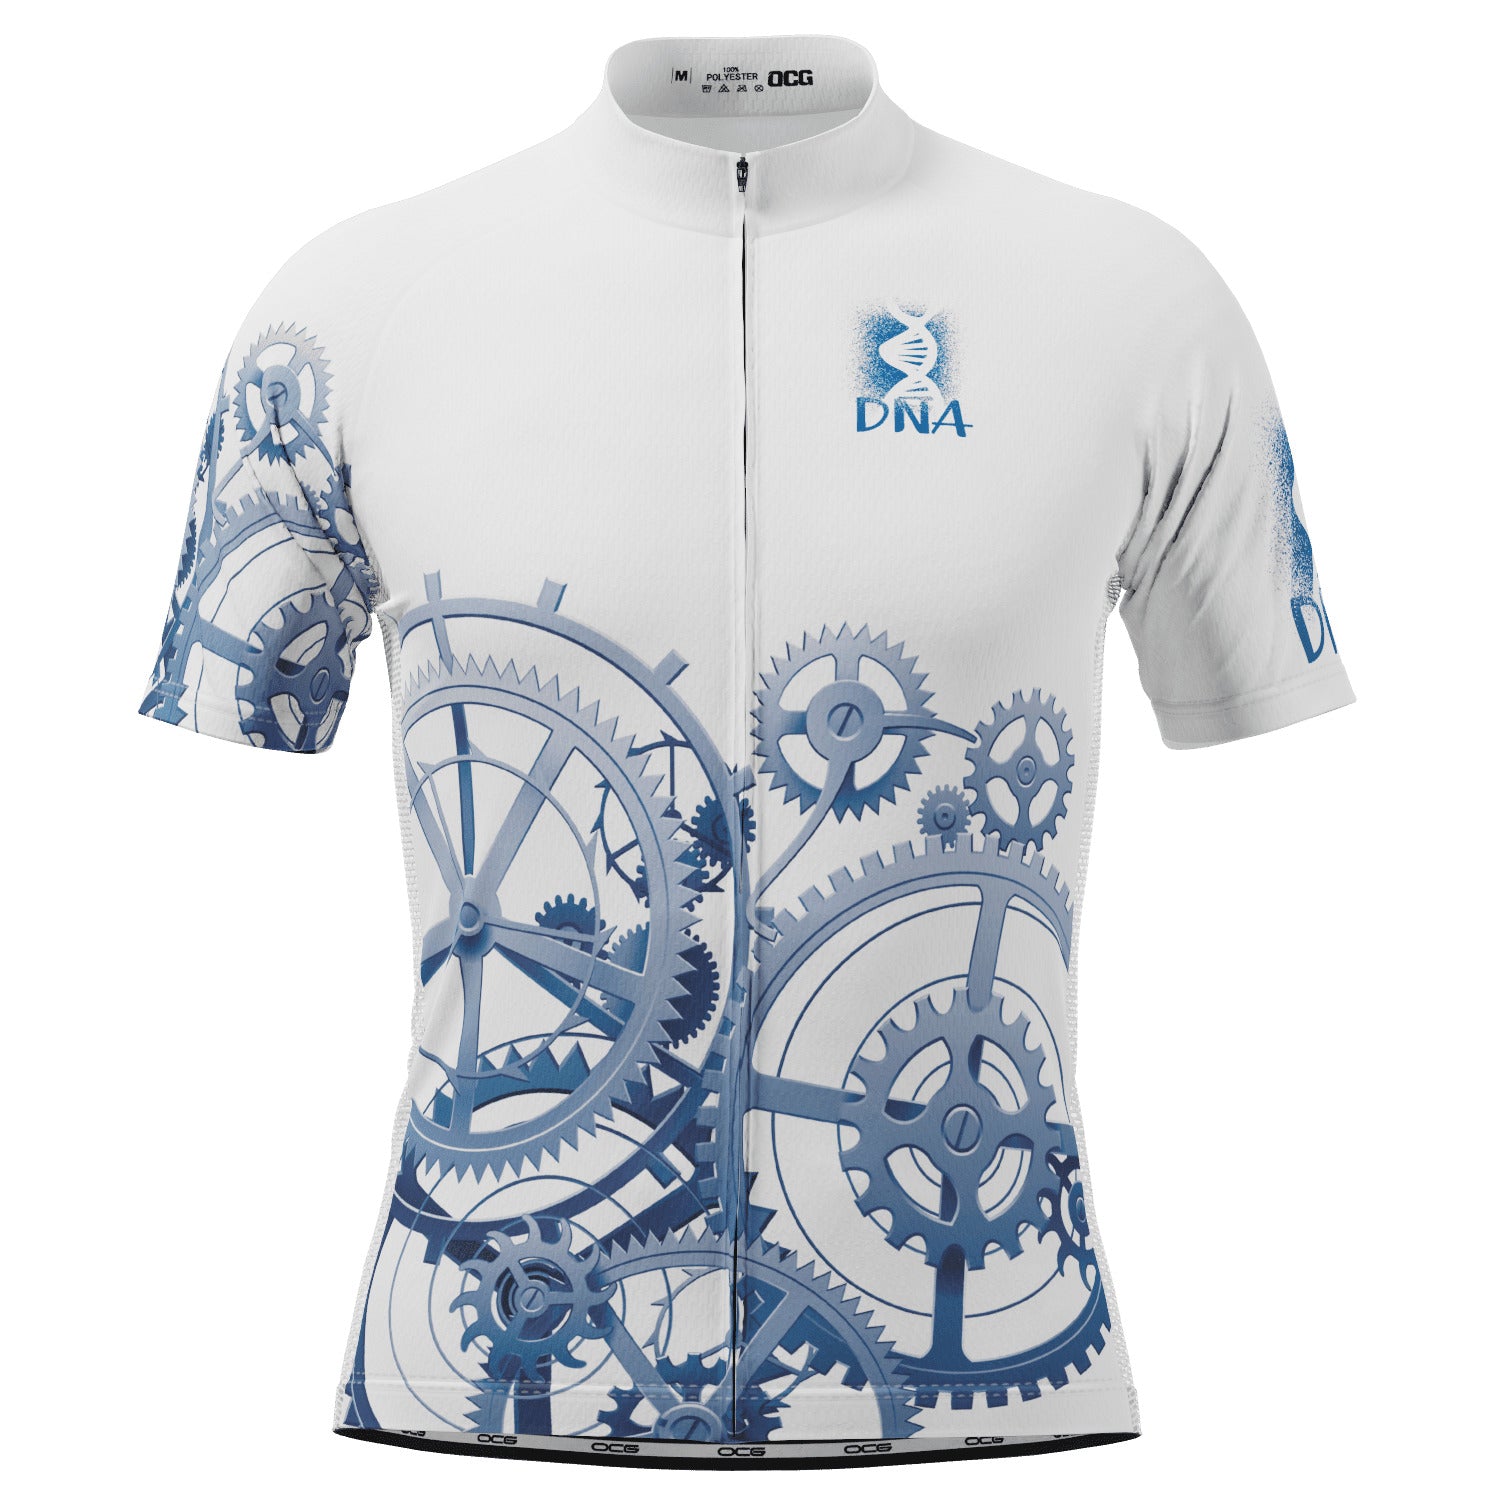 Men's DNA White Short Sleeve Cycling Jersey